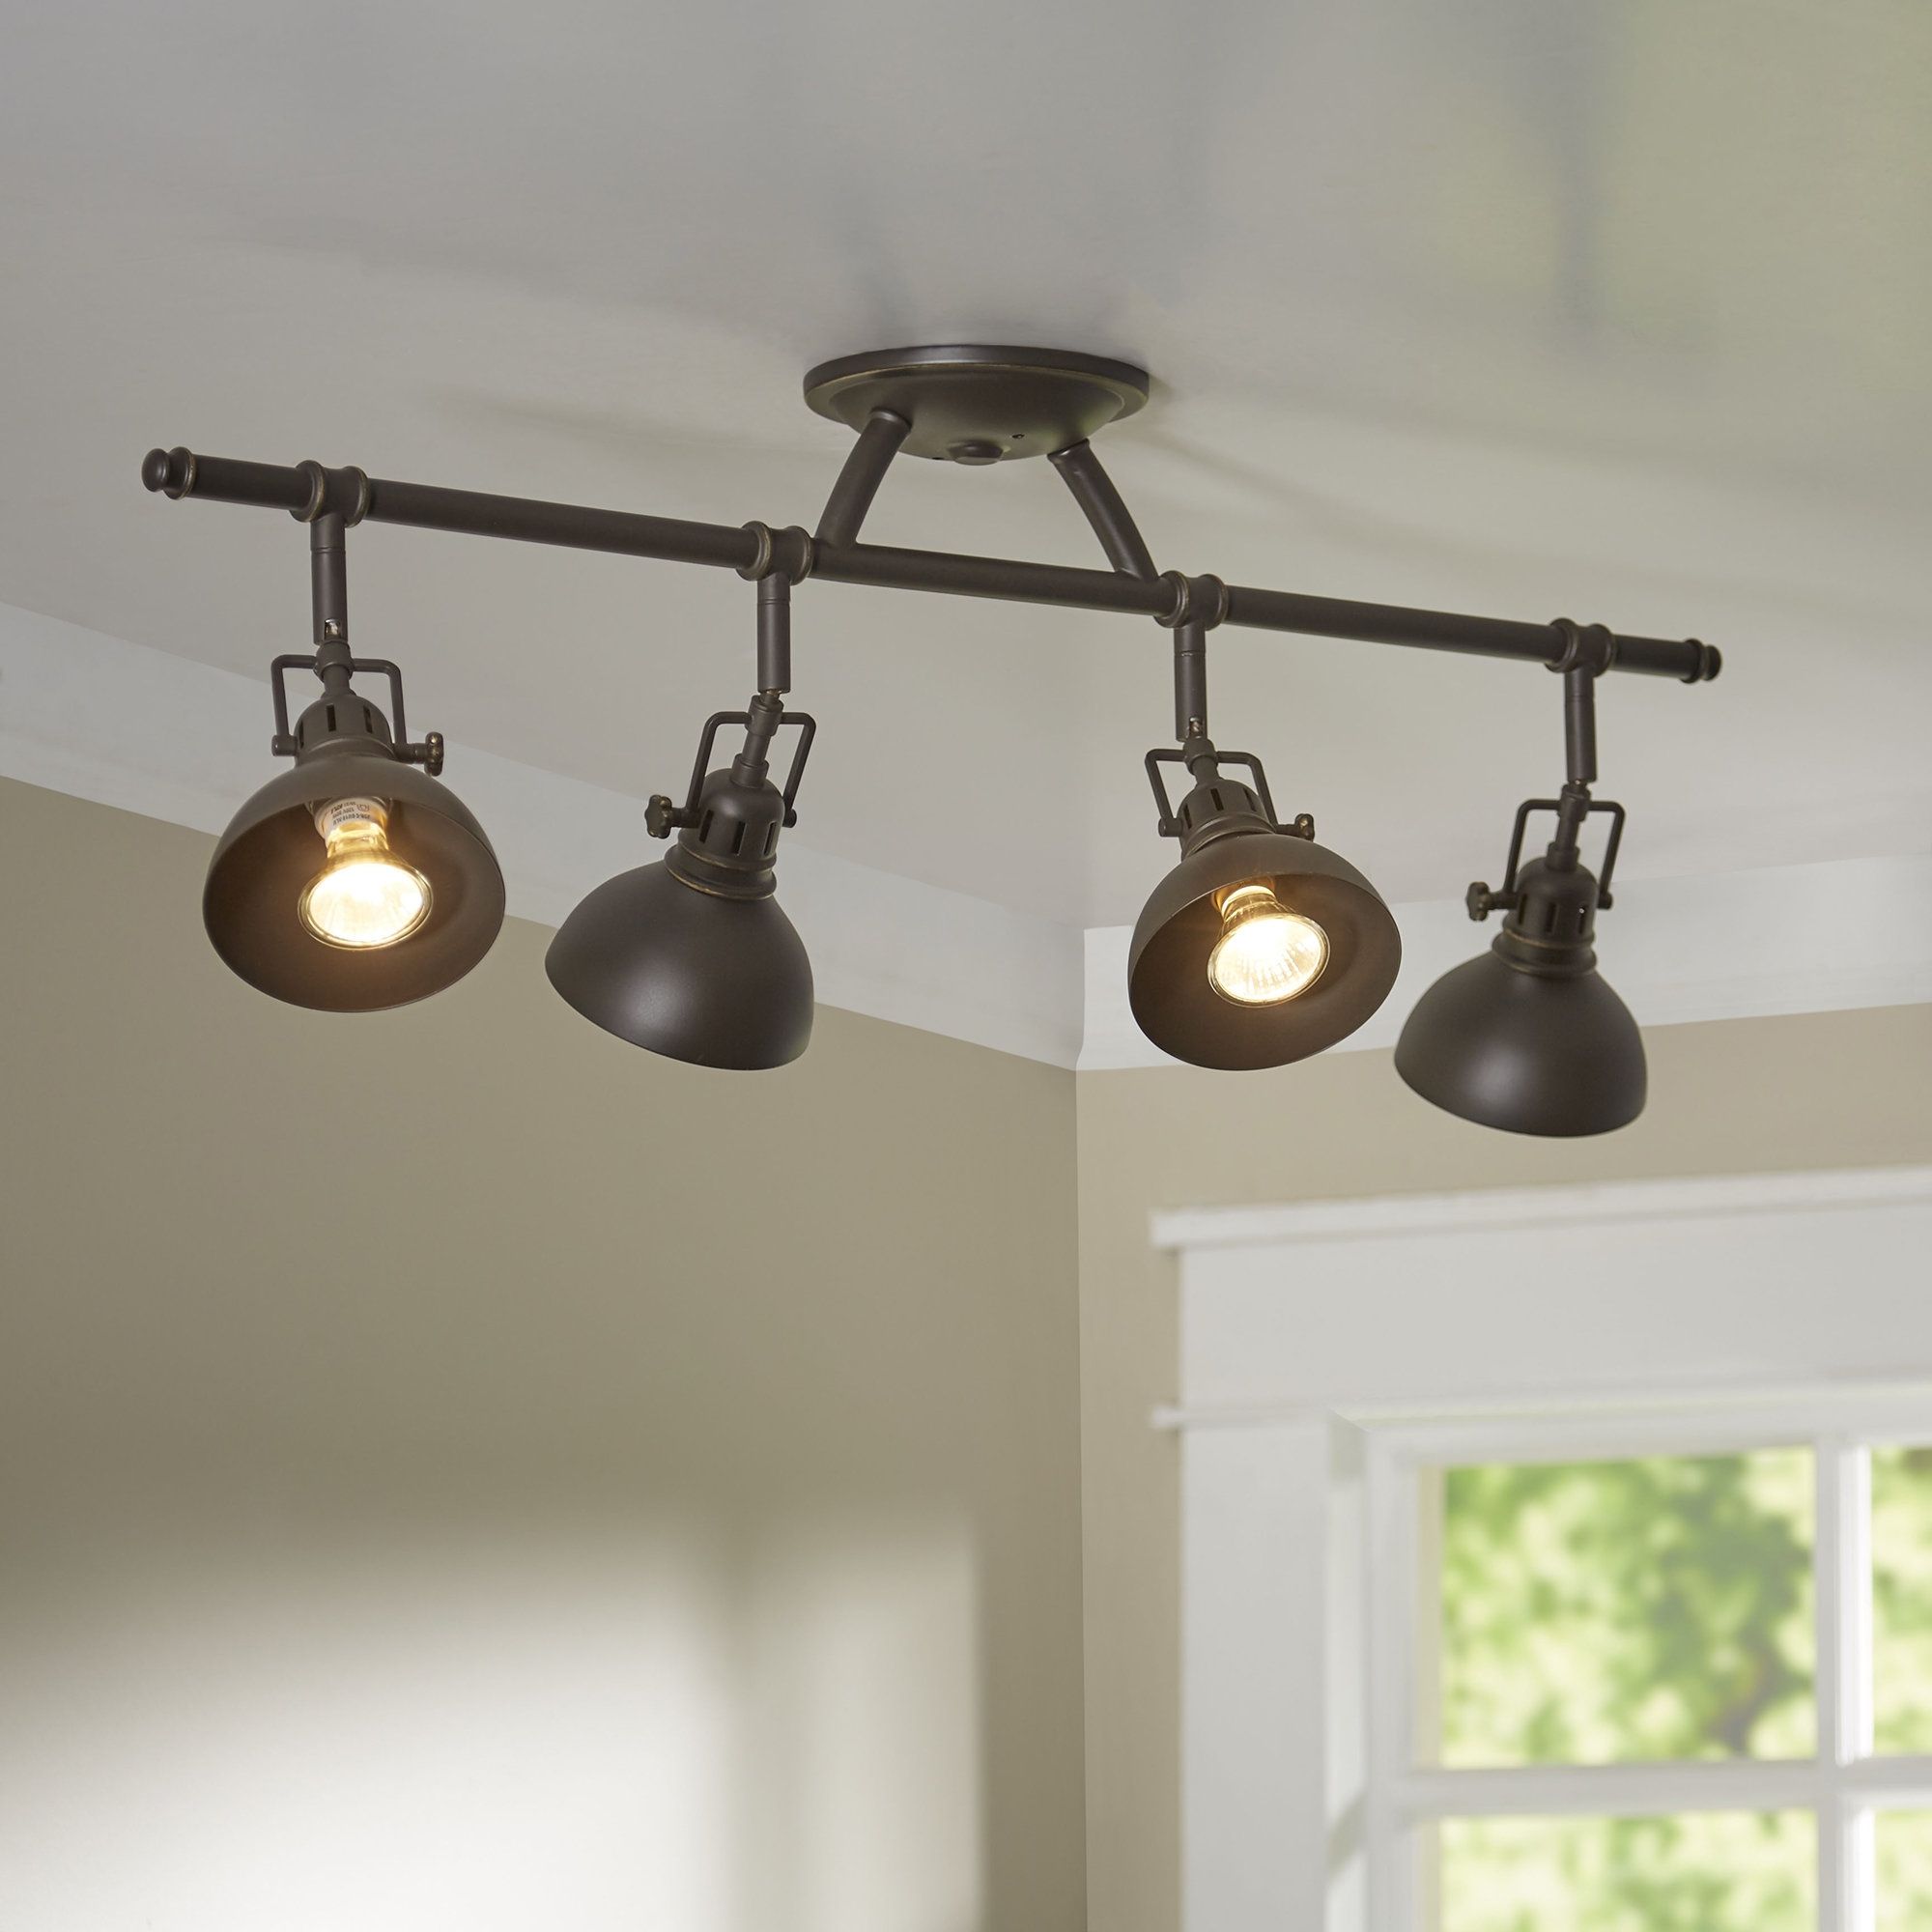 Trendy Modern Hampton Bay Outdoor Lighting At Wayfair Within Track Lighting You'll Love (View 6 of 20)